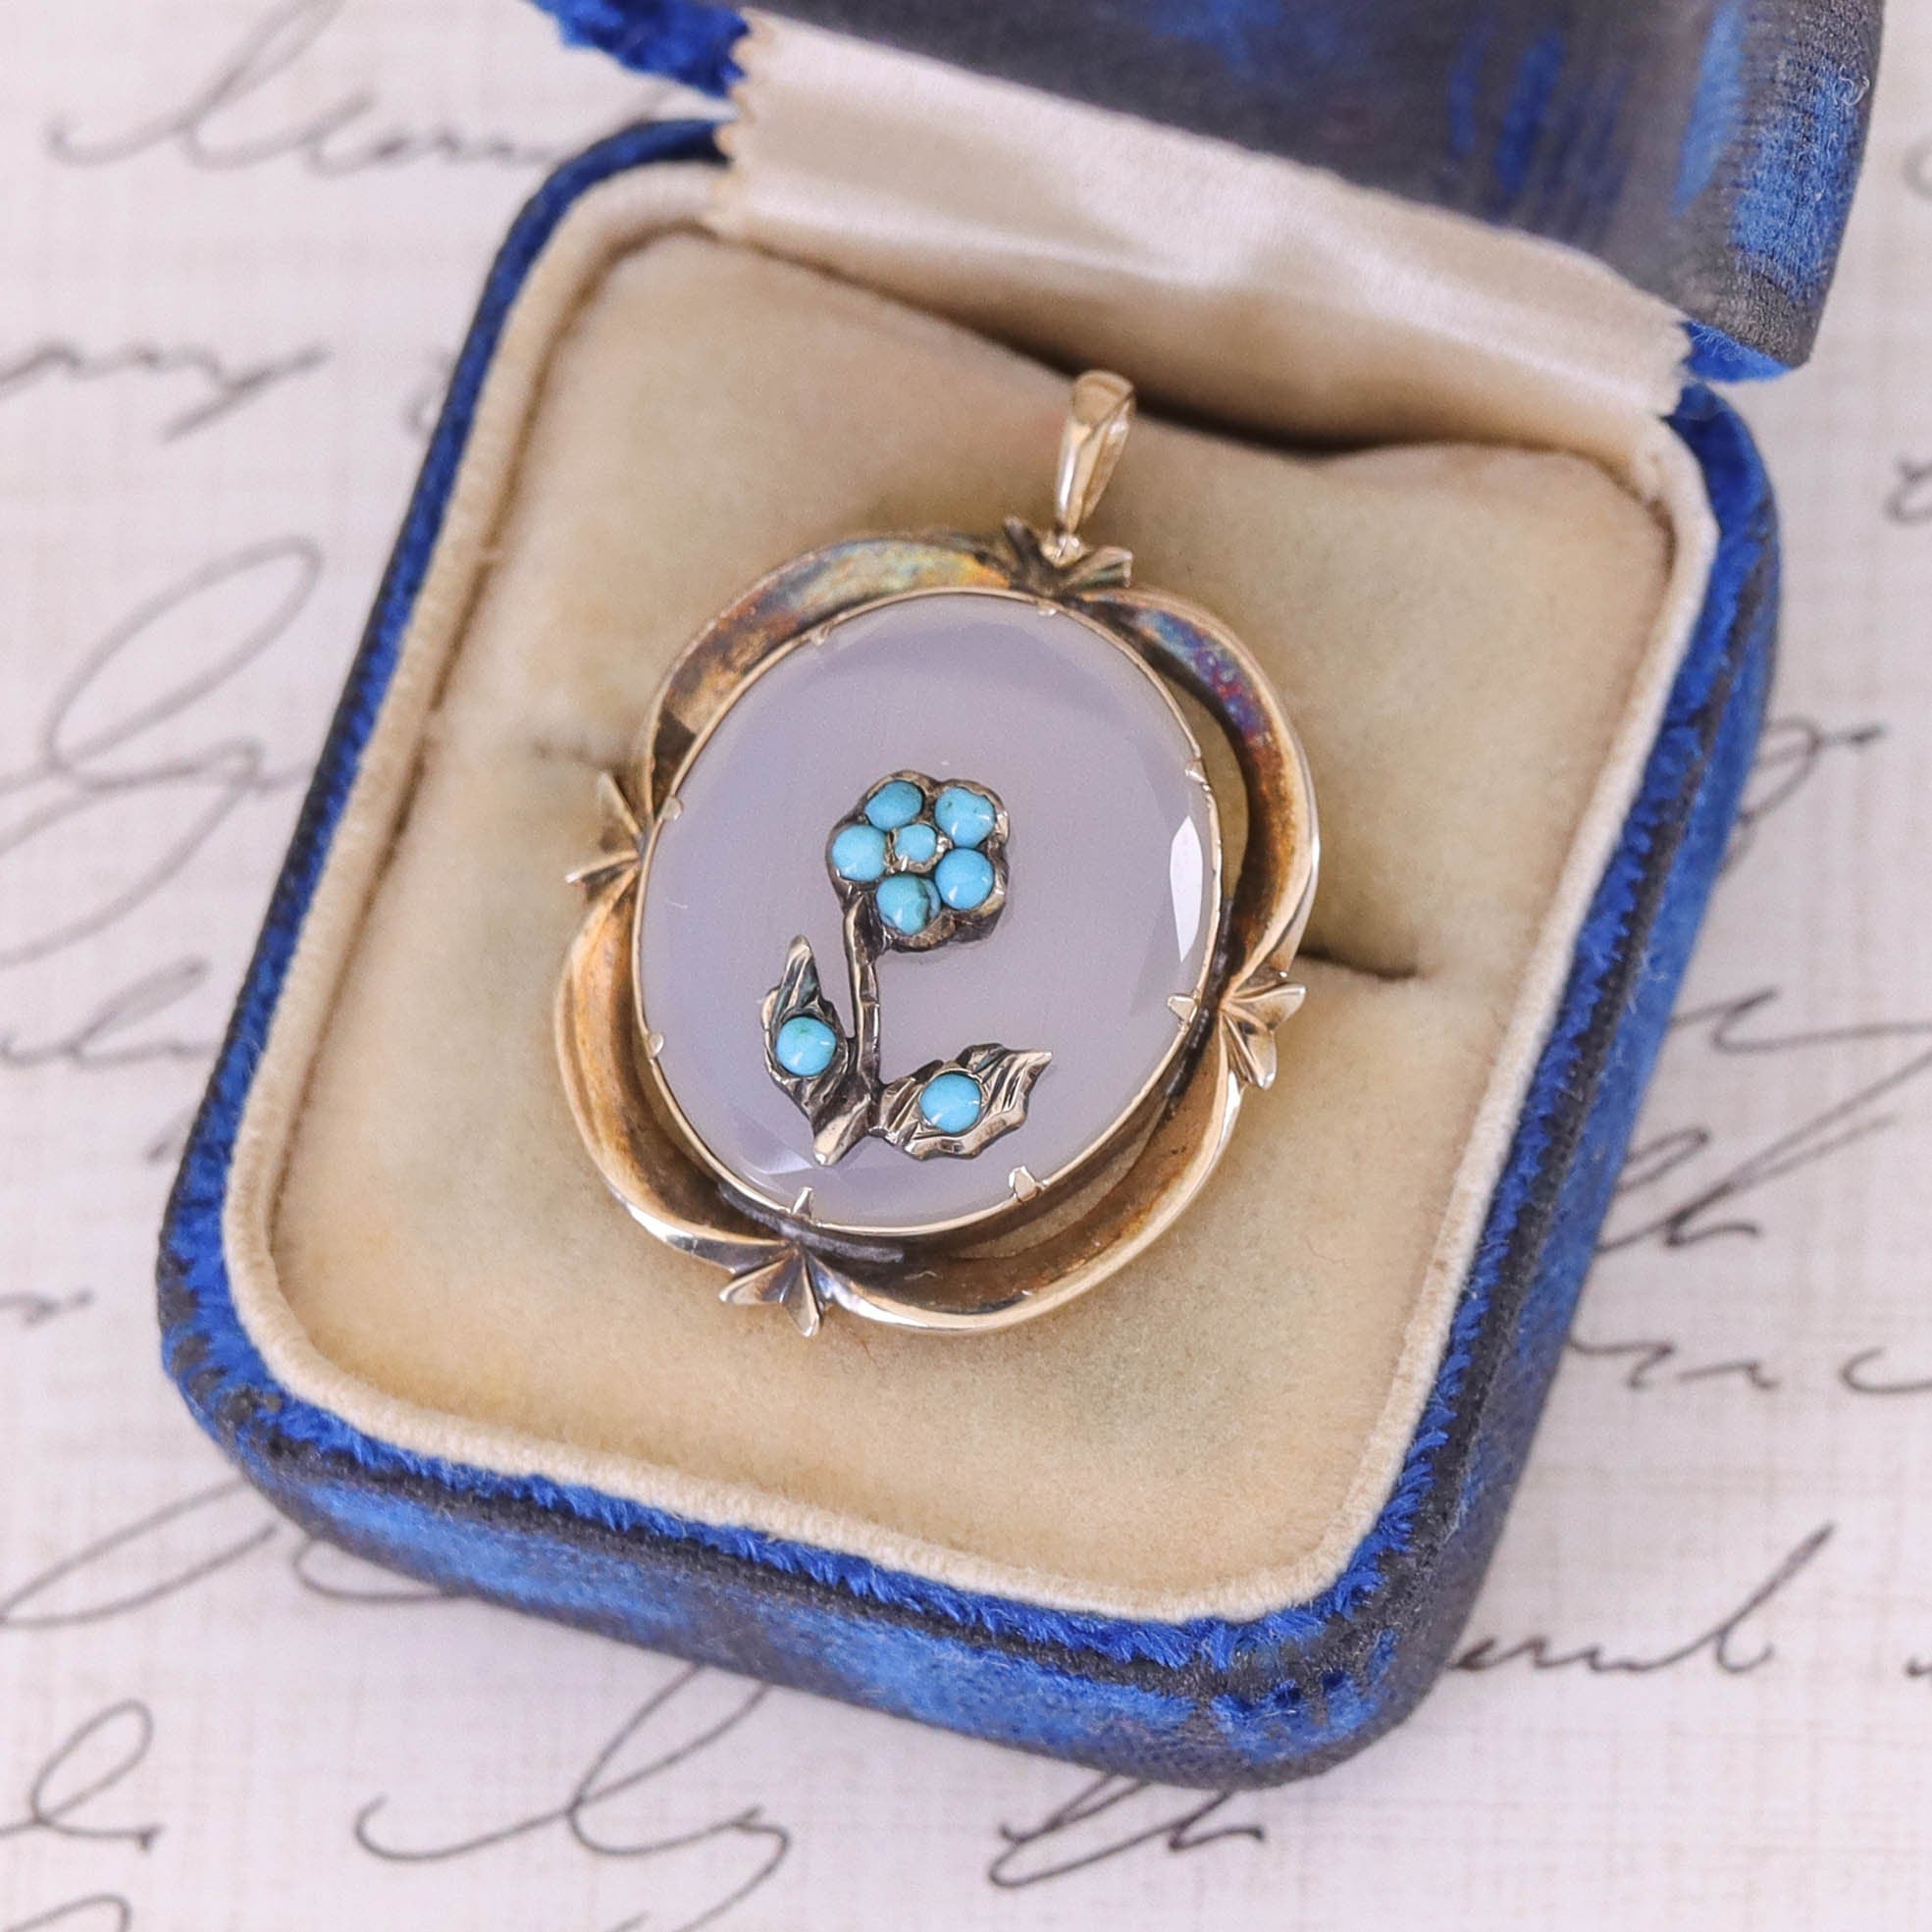 Antique Forget-me-not Conversion Pendant of 10k Gold